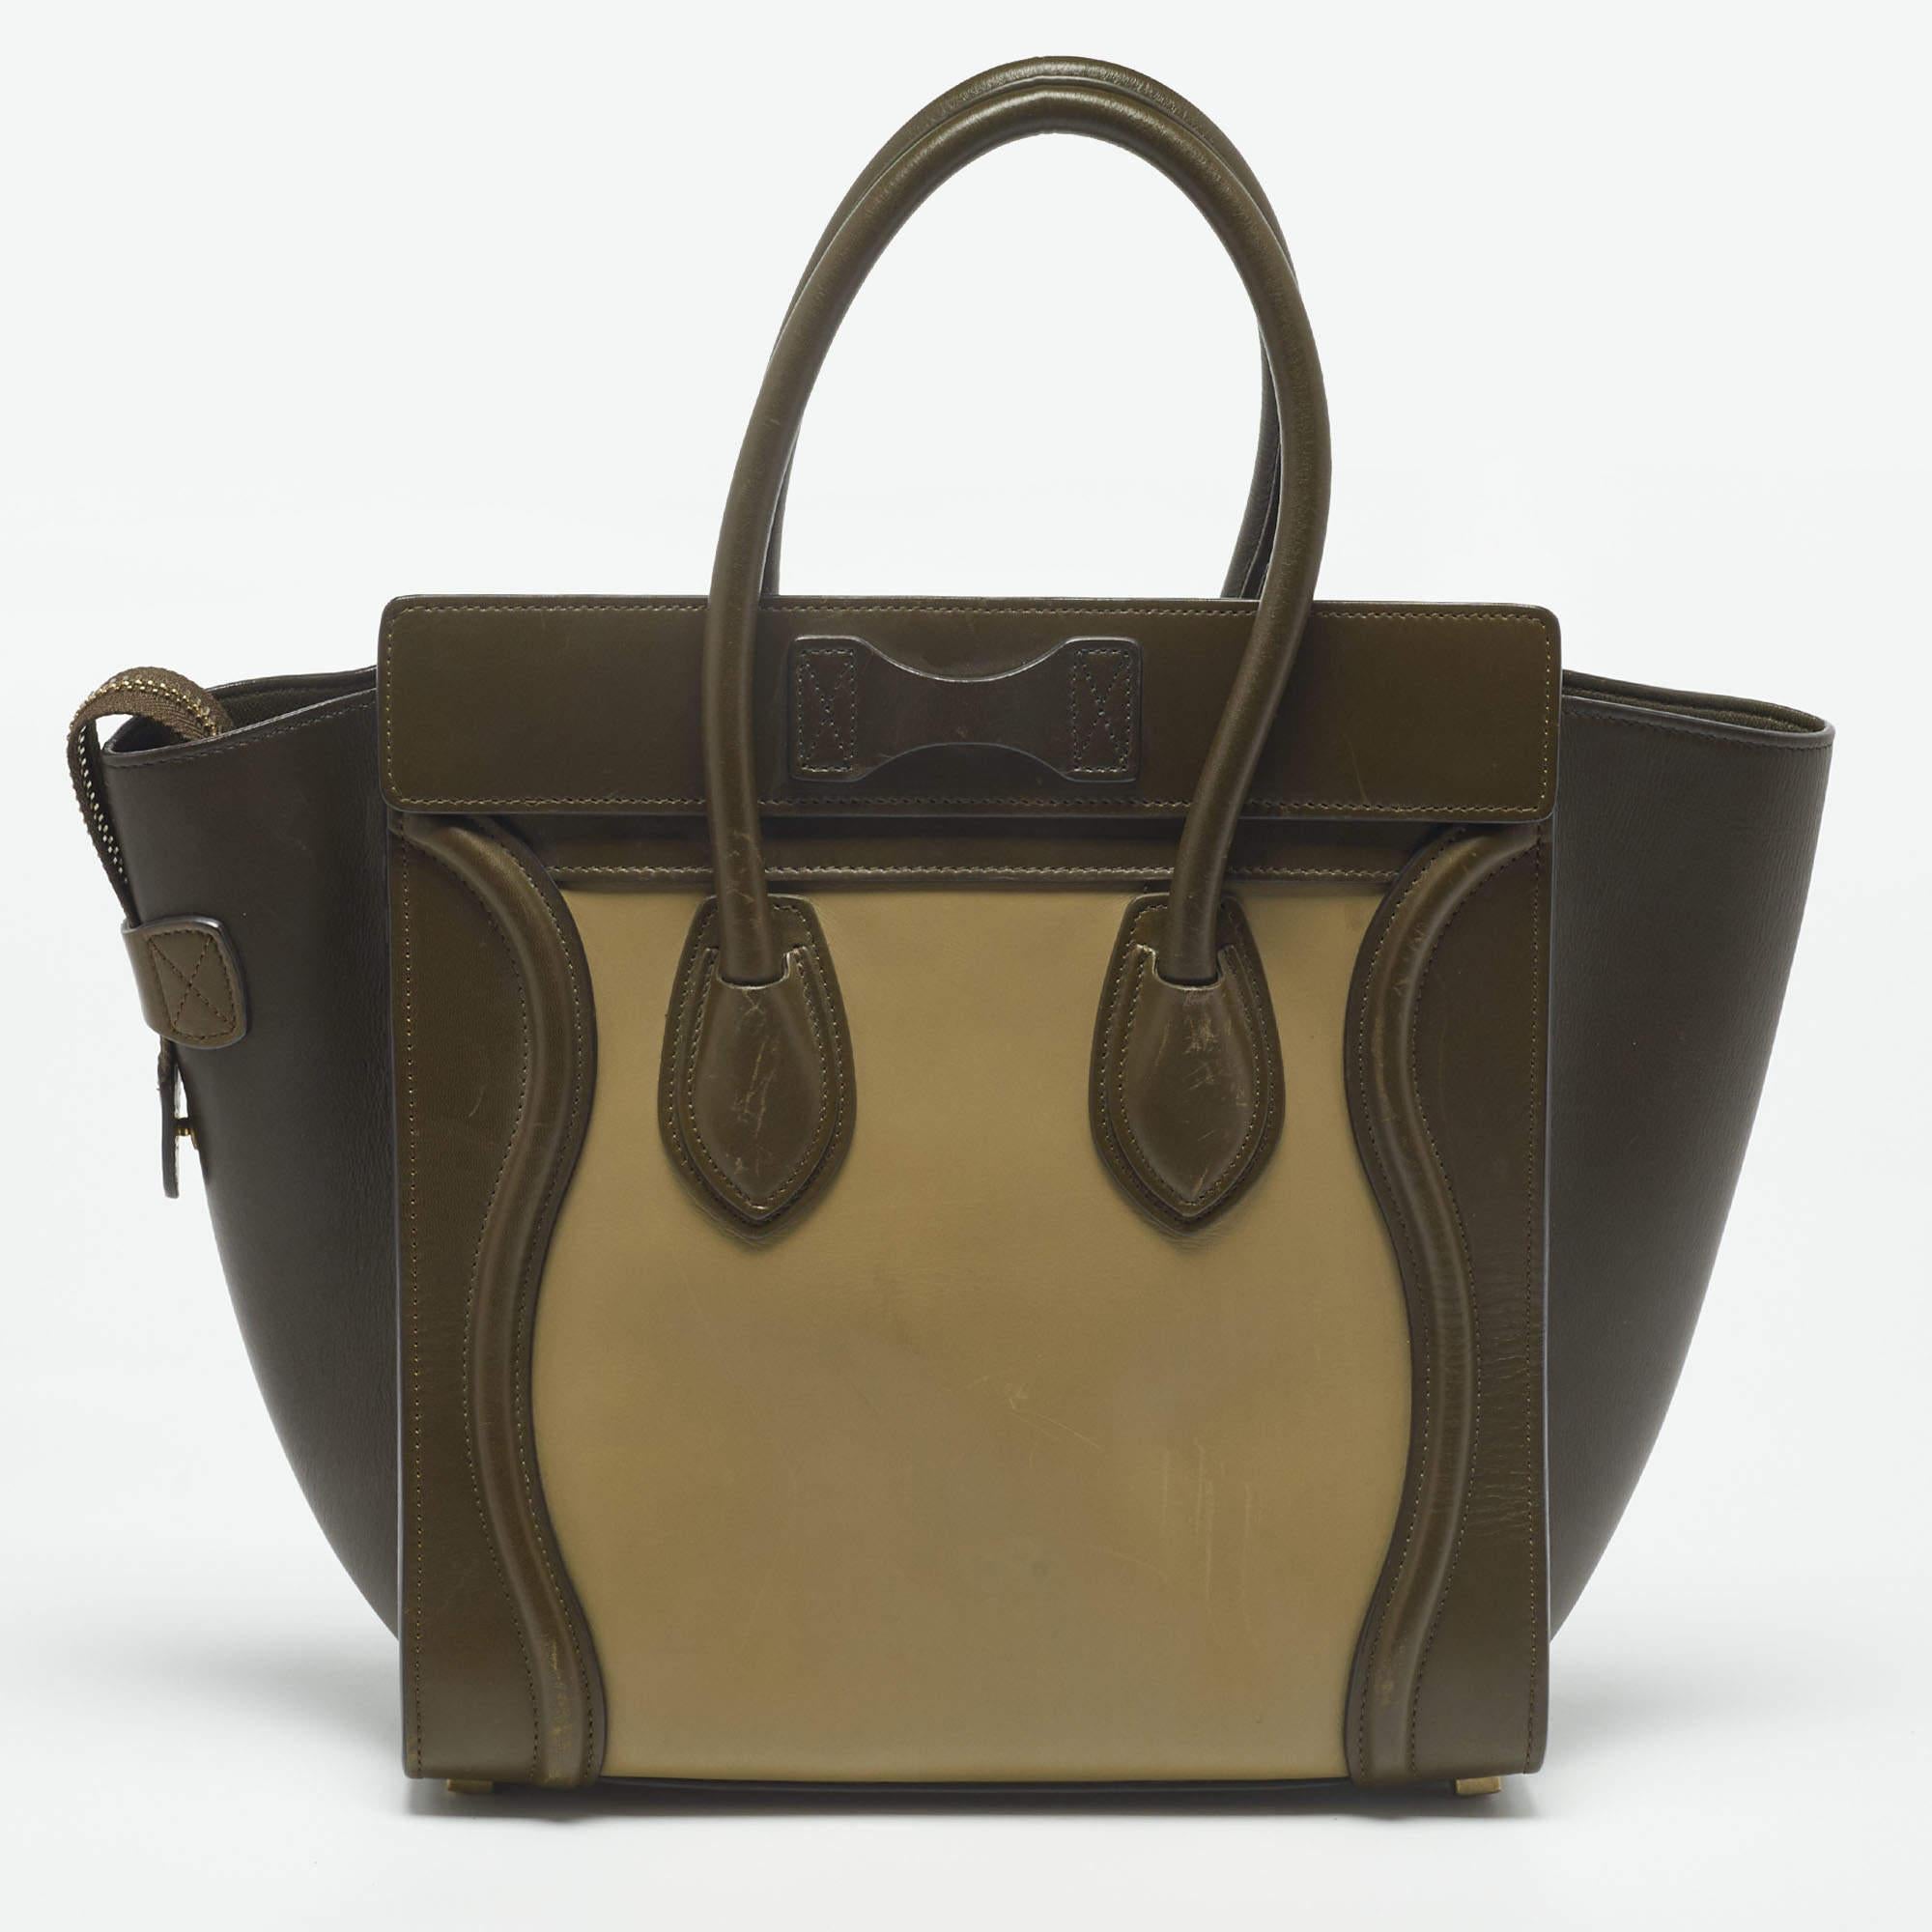 Striking a beautiful balance between essentiality and opulence, this tote from the House of Celine ensures that your handbag requirements are taken care of. It is equipped with practical features for all-day ease.

Includes: Original Dustbag
CELINE